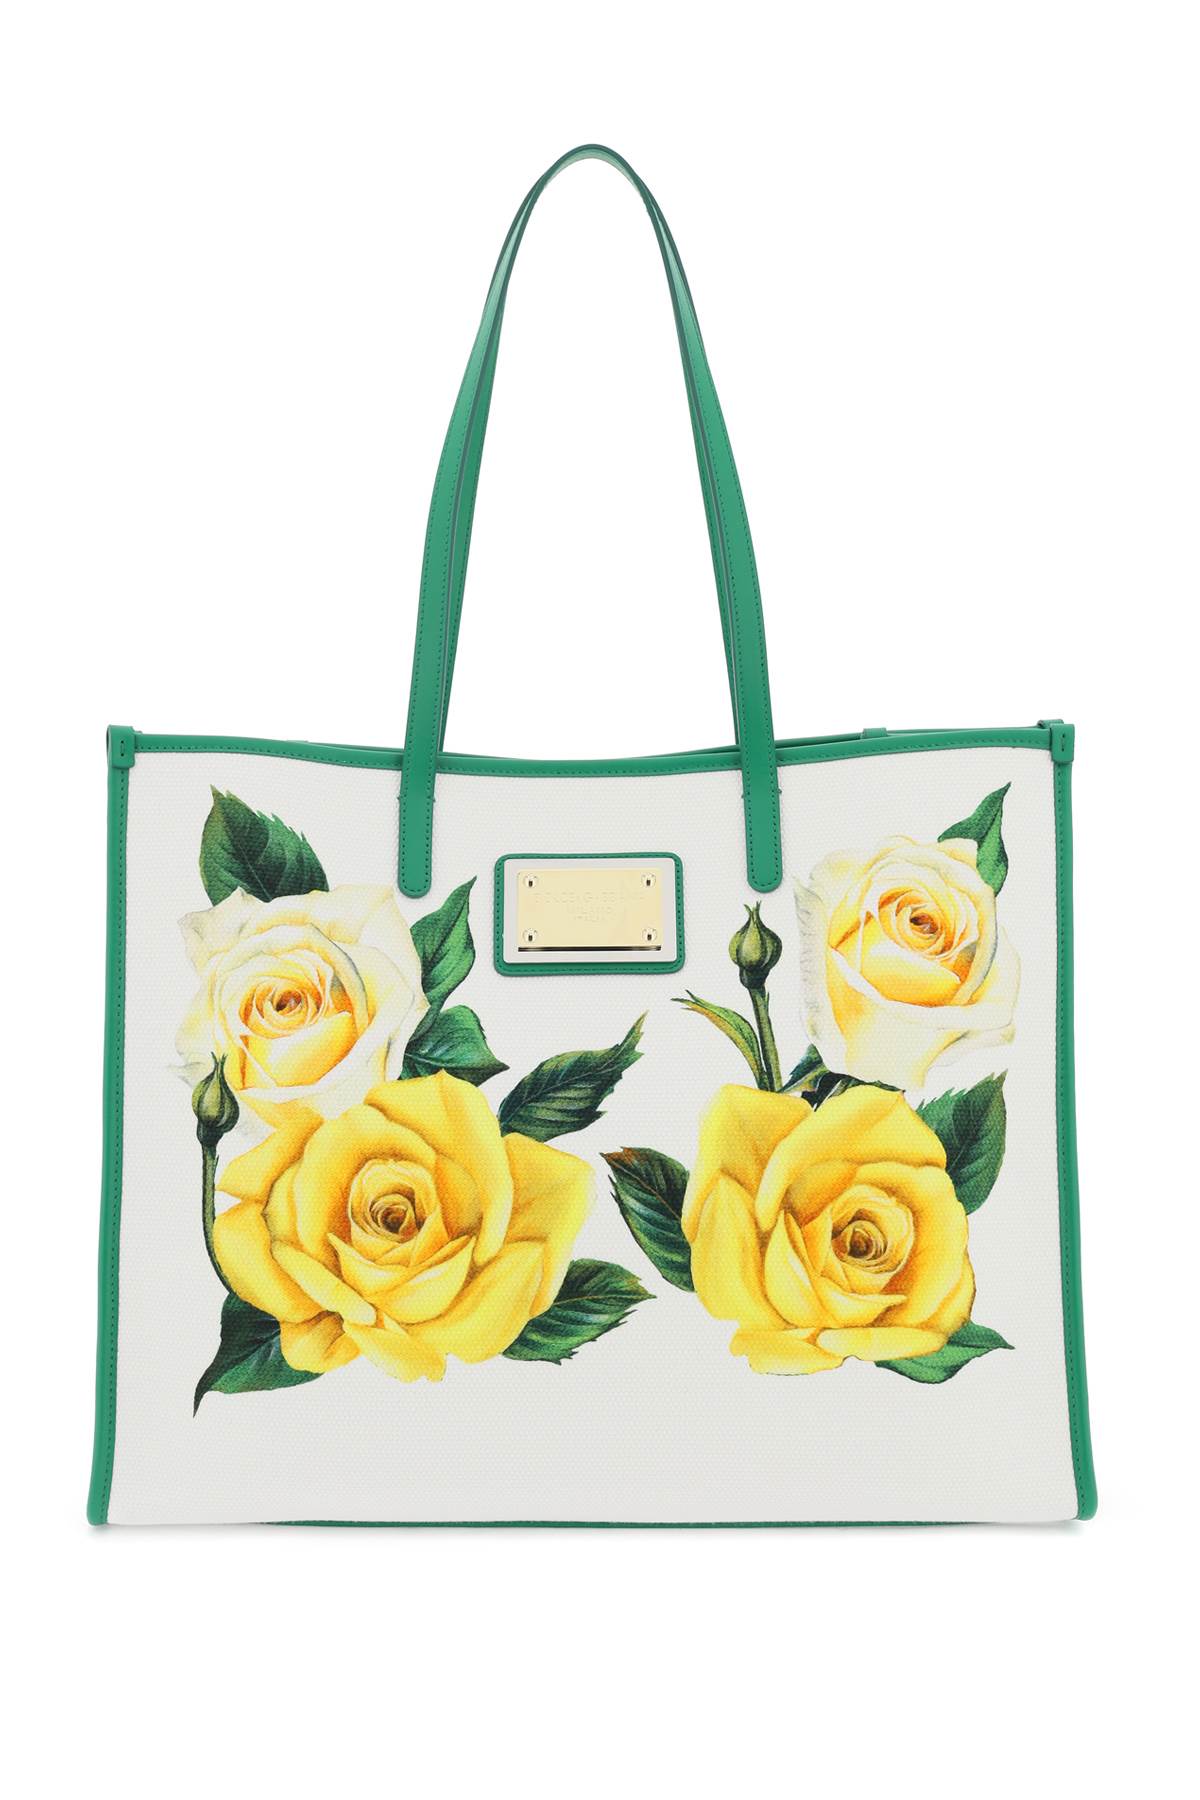 Dolce & Gabbana Tote Bag With Print